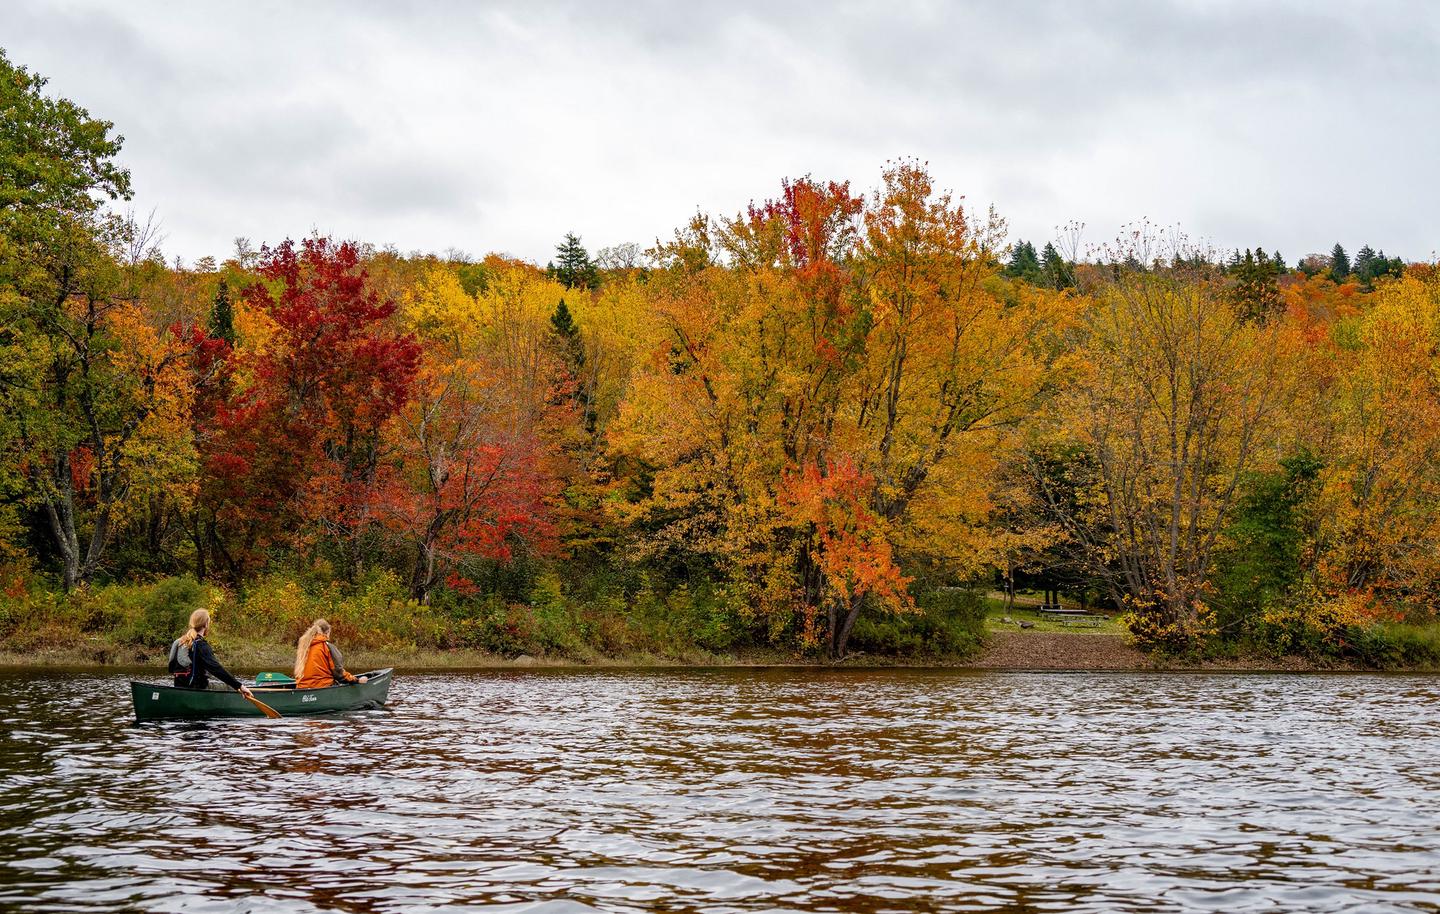 Two people in a canoe navigate towards a clearing (Lunksoos Boat Launch) on a cloudy day. Colorful golden and red tress with evergreens decorate the landscape.Lunksoos Campground can be accessible by boat! Enjoy the views of the East Branch of the Penobscot River during your stay.